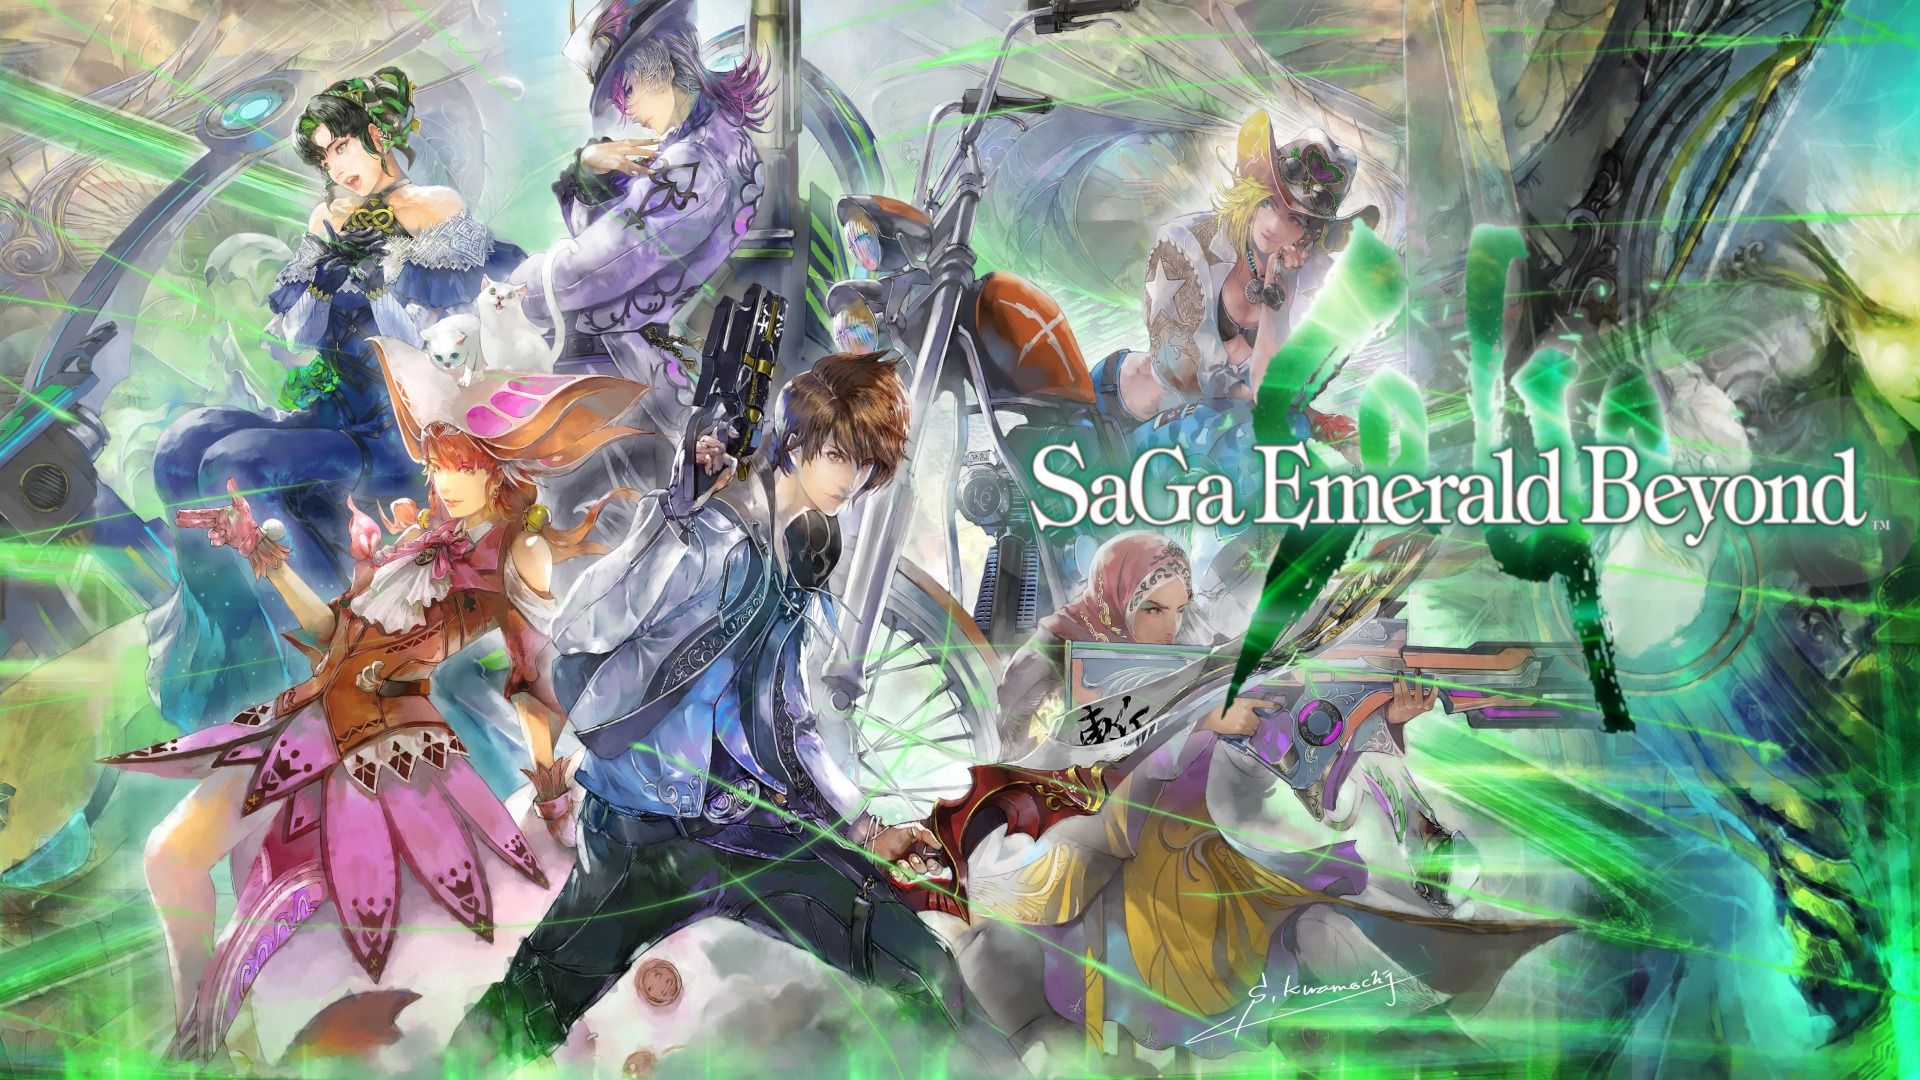 SaGa Emerald Beyond character art showing several characters with green background